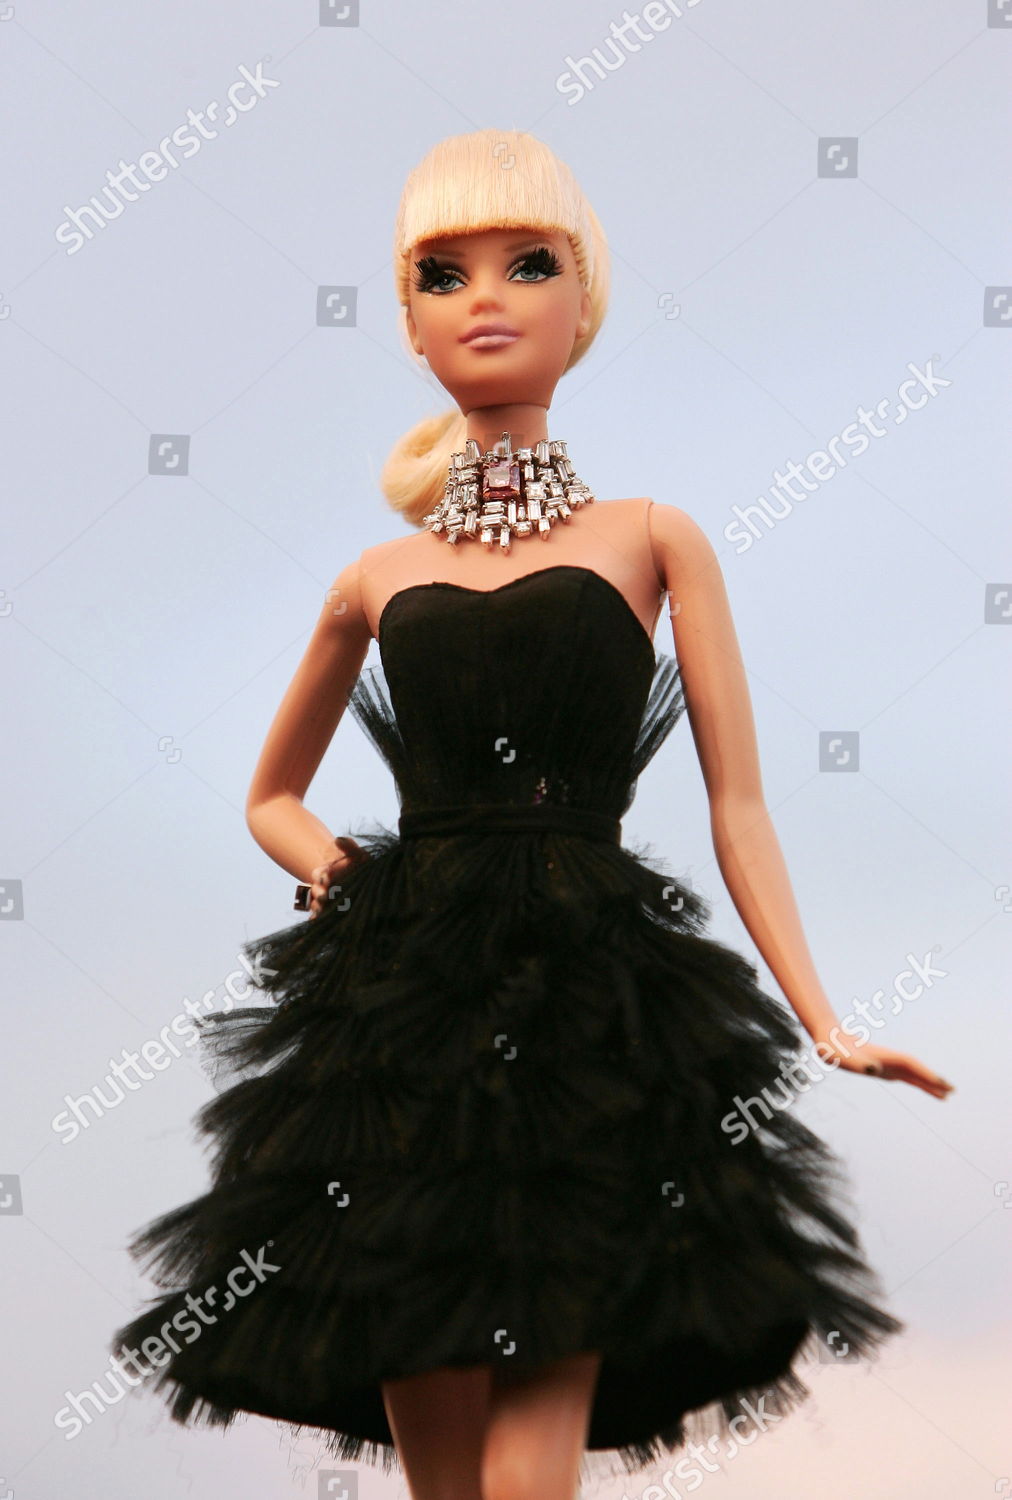 barbie doll most expensive